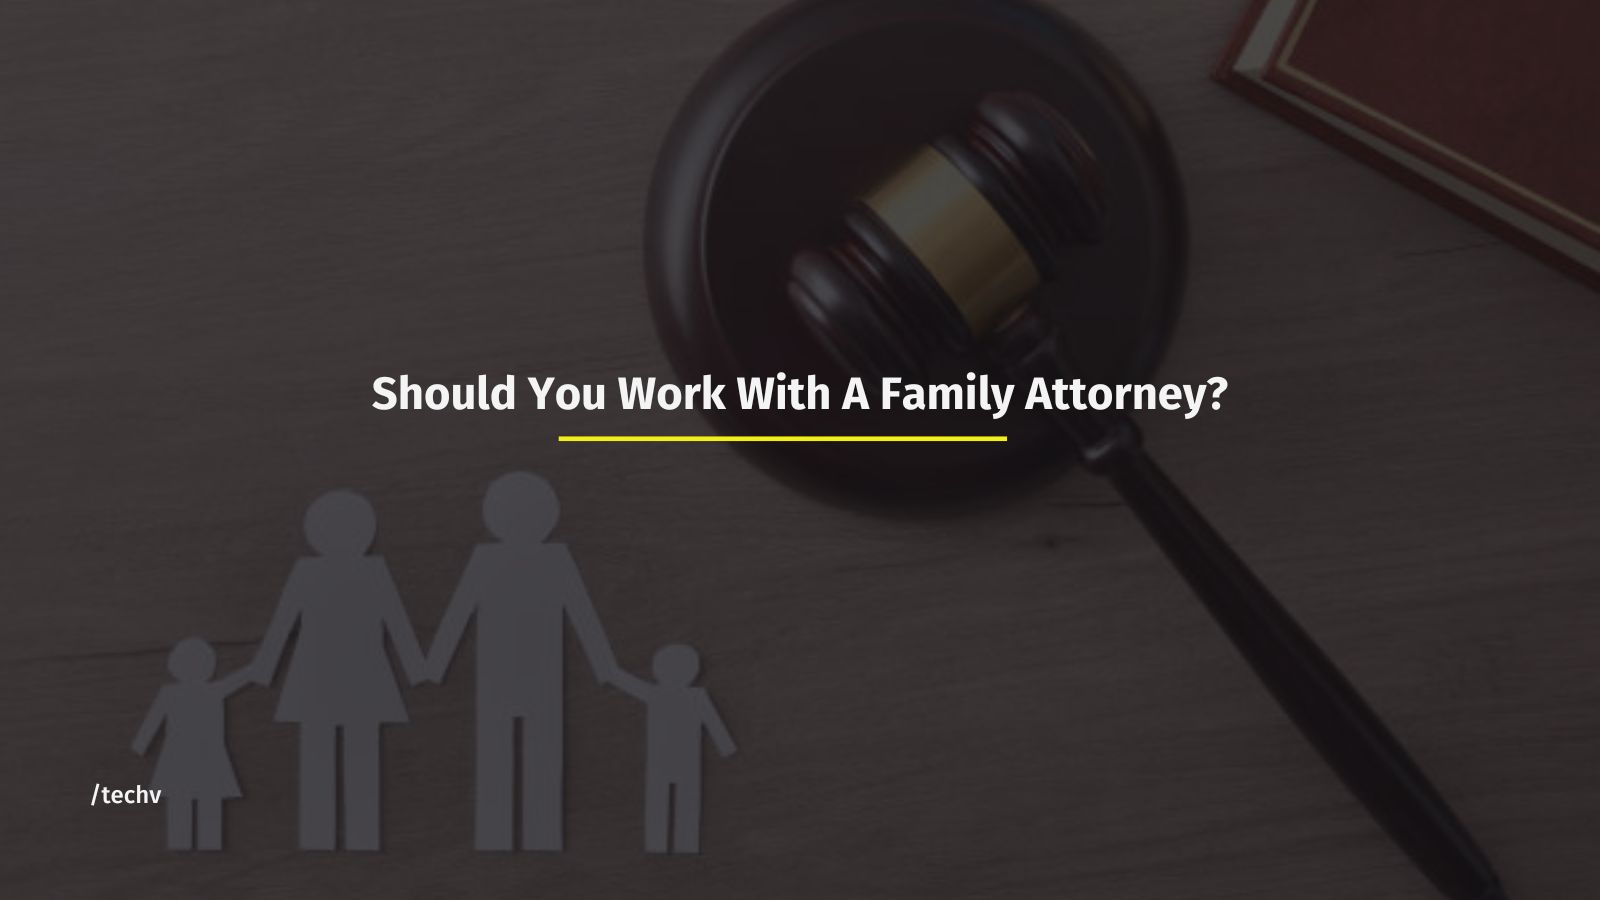 Should You Work With A Family Attorney?